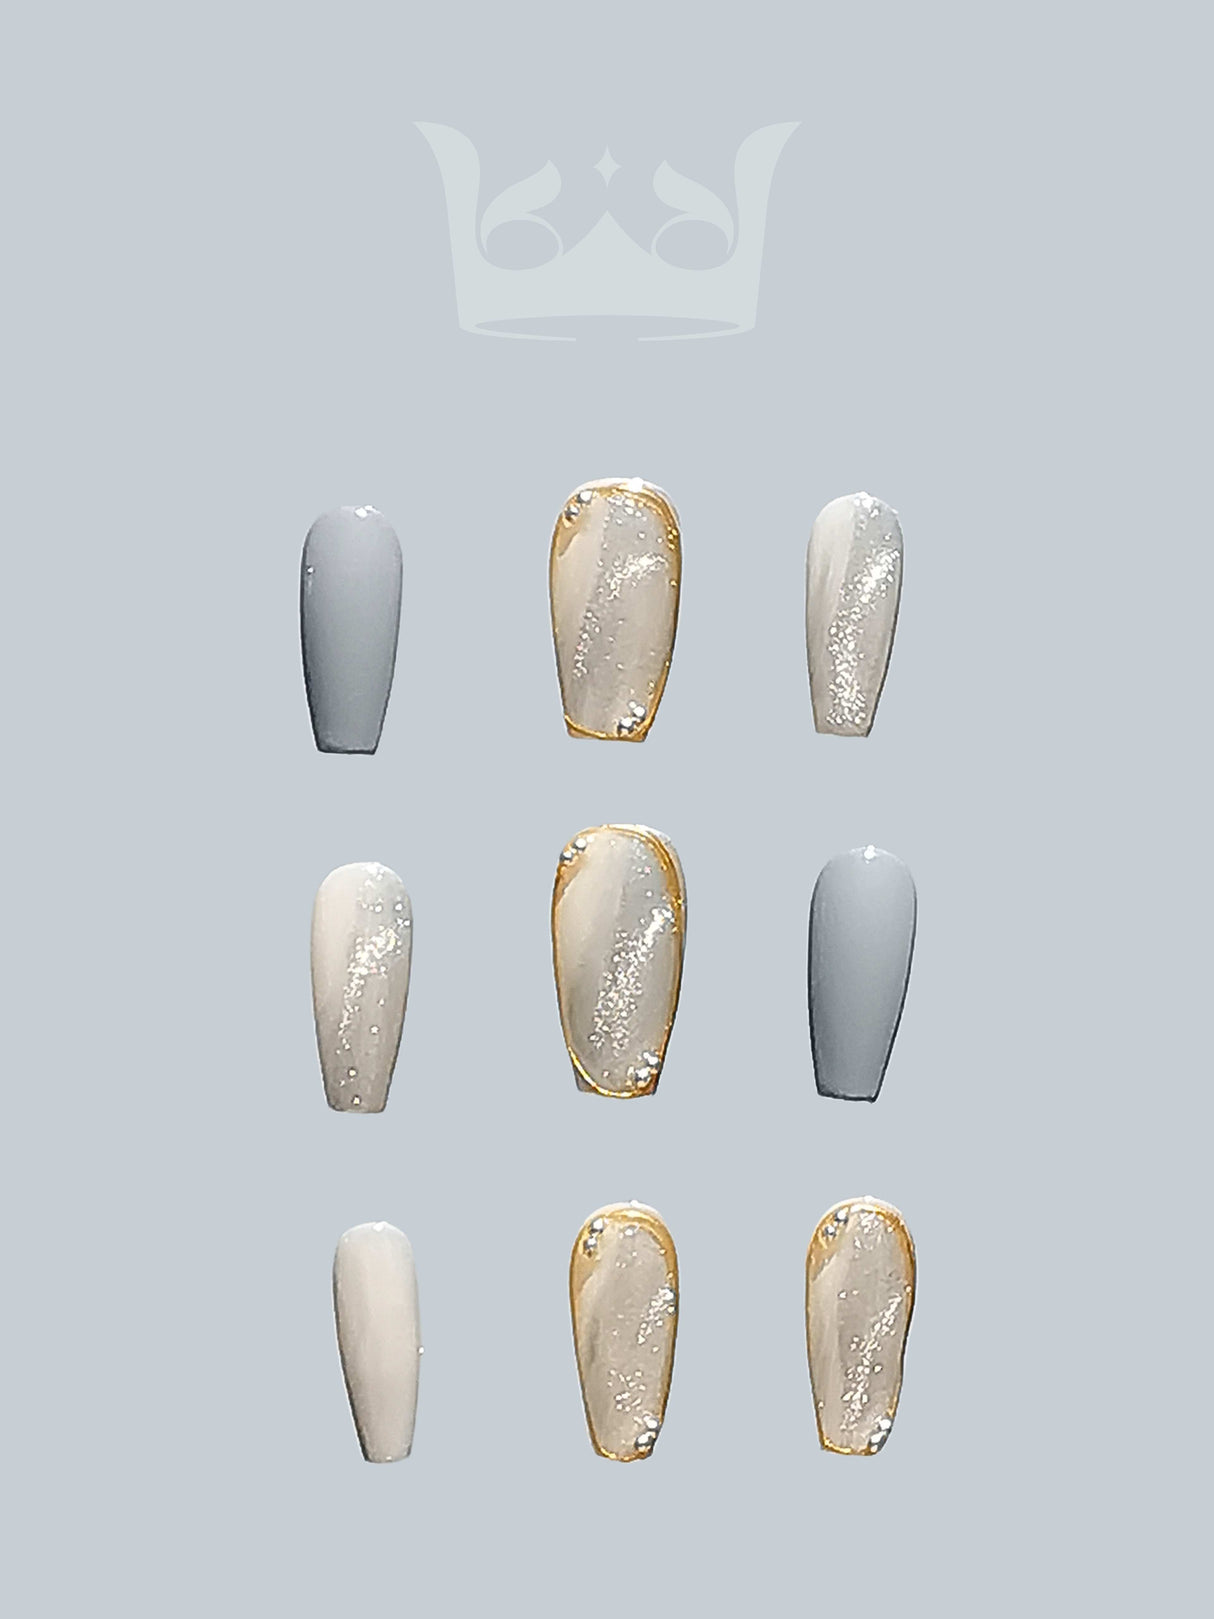 These acrylic nails come in varying lengths and shapes with a cool-toned gray and creamy color scheme, gold foil accents.